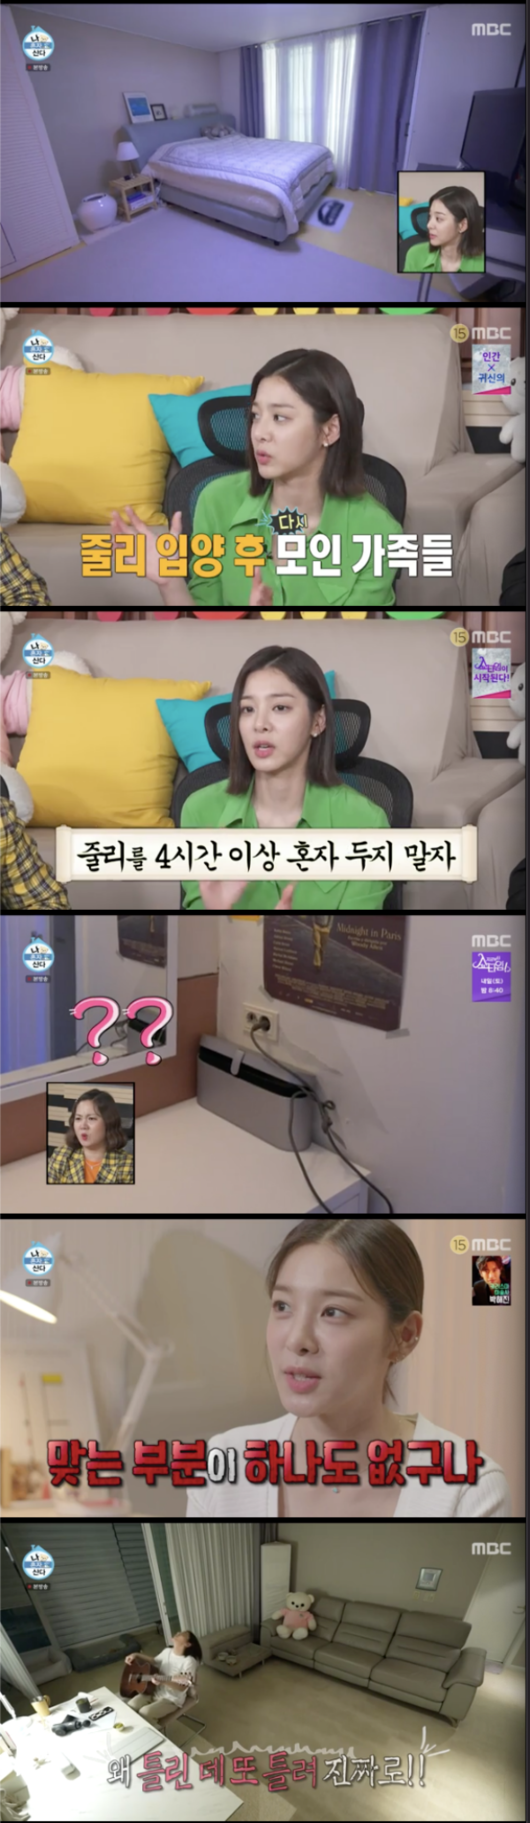 I Live Alone Seol In-ah has told us about why he stays at Intel once a week with his house.Actor Seol In-ah appeared on MBCs I Live Alone, which aired at 11:10 p.m. on the 29th, revealing the antiwar routine.On this day, Seol In-ah opened his eyes at a no-Intel in Yangpyeong. Asked if it was uncomfortable, he said, When I live acting, I go to a local business trip and often can not go home because of my next schedule.I dont feel uncomfortable, replied Seol In-ah, who packed up after a simple wash, driving to the regular boarding area.The board is a place of affection to visit One Week more than three times.Seol In-ah headed to his mothers after enjoying the board; he called his mother and asked her about the choreography of his pet dog Julie, boasting that he had successed in boarding skills.My mother was worried that she was not a national player.The identity of her pet dog Julie was a 7-year-old Jindo dog.I leave it to my mother when I go out on a schedule or go to One Week once, Seol In-ah said of Julie, saying she was the most beloved being.He added: I am a child in a home foster care home, and as soon as I opened the shelter door, I saw a small white ball cub guarding me and decided to bring it in.The house of Seol In-ah was also revealed: I moved in my sixth grade at elementary school. I lived with my family for 14 years.I am still, but my family is independent. Gian asked, Why? I can not live? He said, My mother went to Jeju Island to live with me. Its my rule not to leave Julie alone for more than four hours so that her family can get back together because of Julie, said Seol In-ah. The house is passed on to the family, he said.I think my mother and I are not really interested in Interiors. I was doing self-interiors (because I didnt like it), and I was dressed up in a Grey & White combination, but Im dissatisfied, and there are not a couple of places to fix it, he added.On his return home, Seol In-ah washed her feet first. She and Seol In-ah, who had been playing for a while, fell wearily into bed.For a moment, Seol In-ah took Julie to visit a cafe in her acquaintance, where she had a Shiva dog, who laughed, saying, Its a fight with Han.My close sister is the cafe boss, I just fell down because I was not feeling well and came to help, Seol In-ah said of the reason she found the cafe.He helped with the overall work from ordering to organizing outside of coffee-making: Jun Hyon-moo recalled the past, saying it was a scene he had seen in the scene of his experience life.In the midst of his mind, Seol In-ah never forgot to walk with Julie; Seol In-ah, who had a schedule the next day, left Julie to his mother and went home.Seol In-ah, who wrote Haru well, did not rest even when he came home; he did not finish Haru until he practiced guitar and wrote a diary.I think Im less tired when Im working, said Kee, who saw Seol In-ahs routine, who follows my sleep and moves constantly.I think Im moving more because I have severe insomnia, he said.Cocoon said, I am also insomnia, but I have to sleep when I am sleepy tomorrow.Jun Hyon-moo asked Park Na-rae if she had insomnia and Park Na-rae replied: No.Jun Hyon-moo laughed, saying, People who beat like us do not have insomnia.MBC entertainment I Live Alone broadcast screen capture